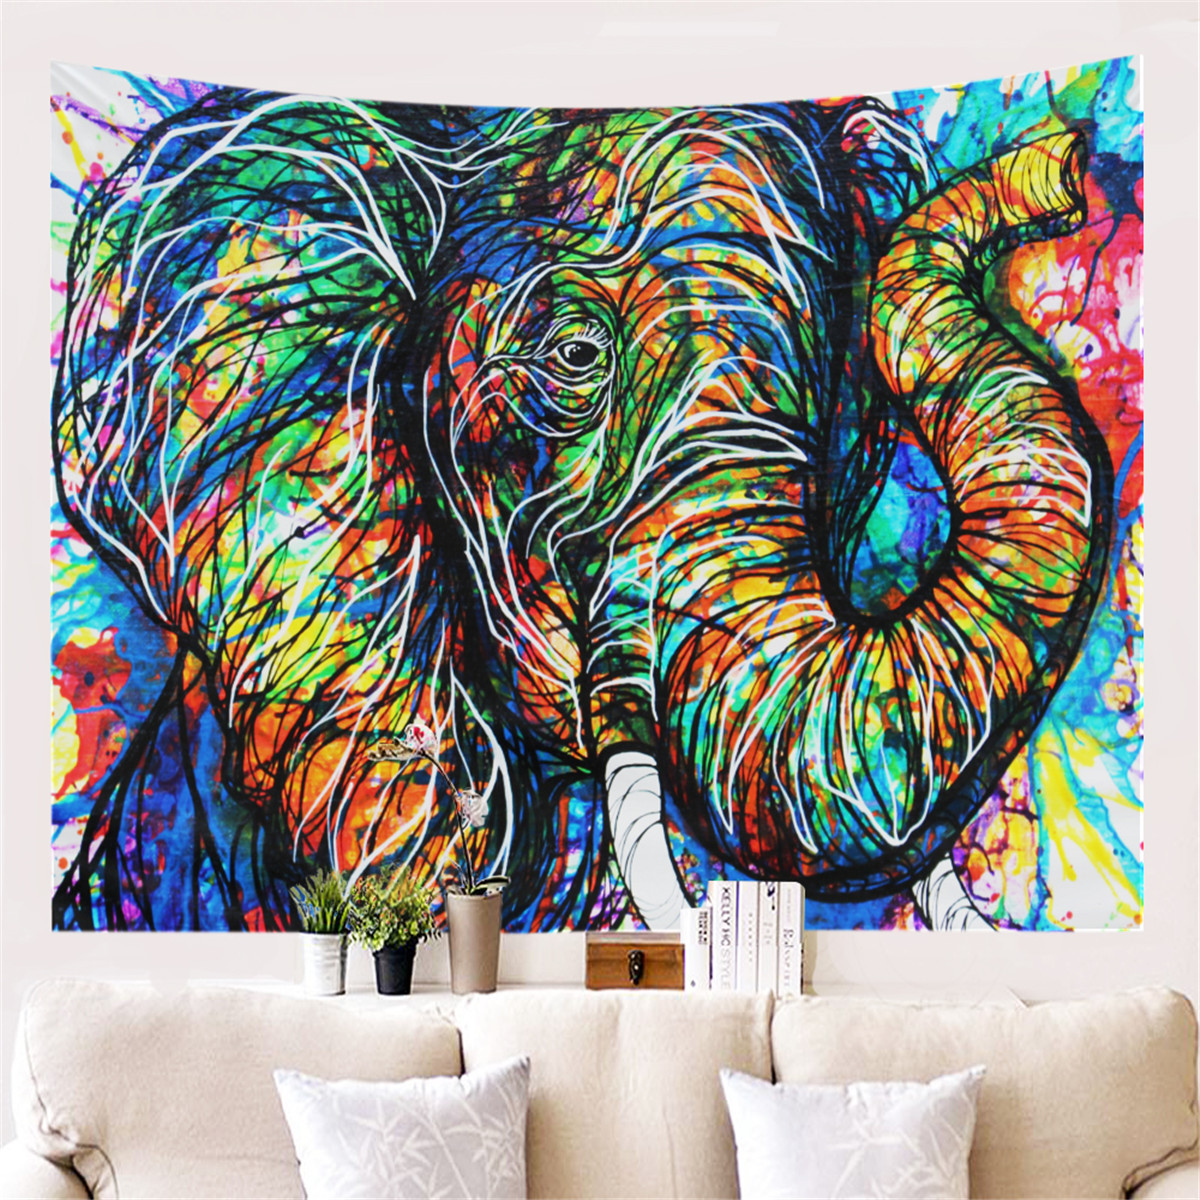 Colorful-Dye-Elephant-Tapestry-Wall-Hanging-Hippie-Tapestry-Colored-Printed-Decorative-Indian-Tapest-1751738-6